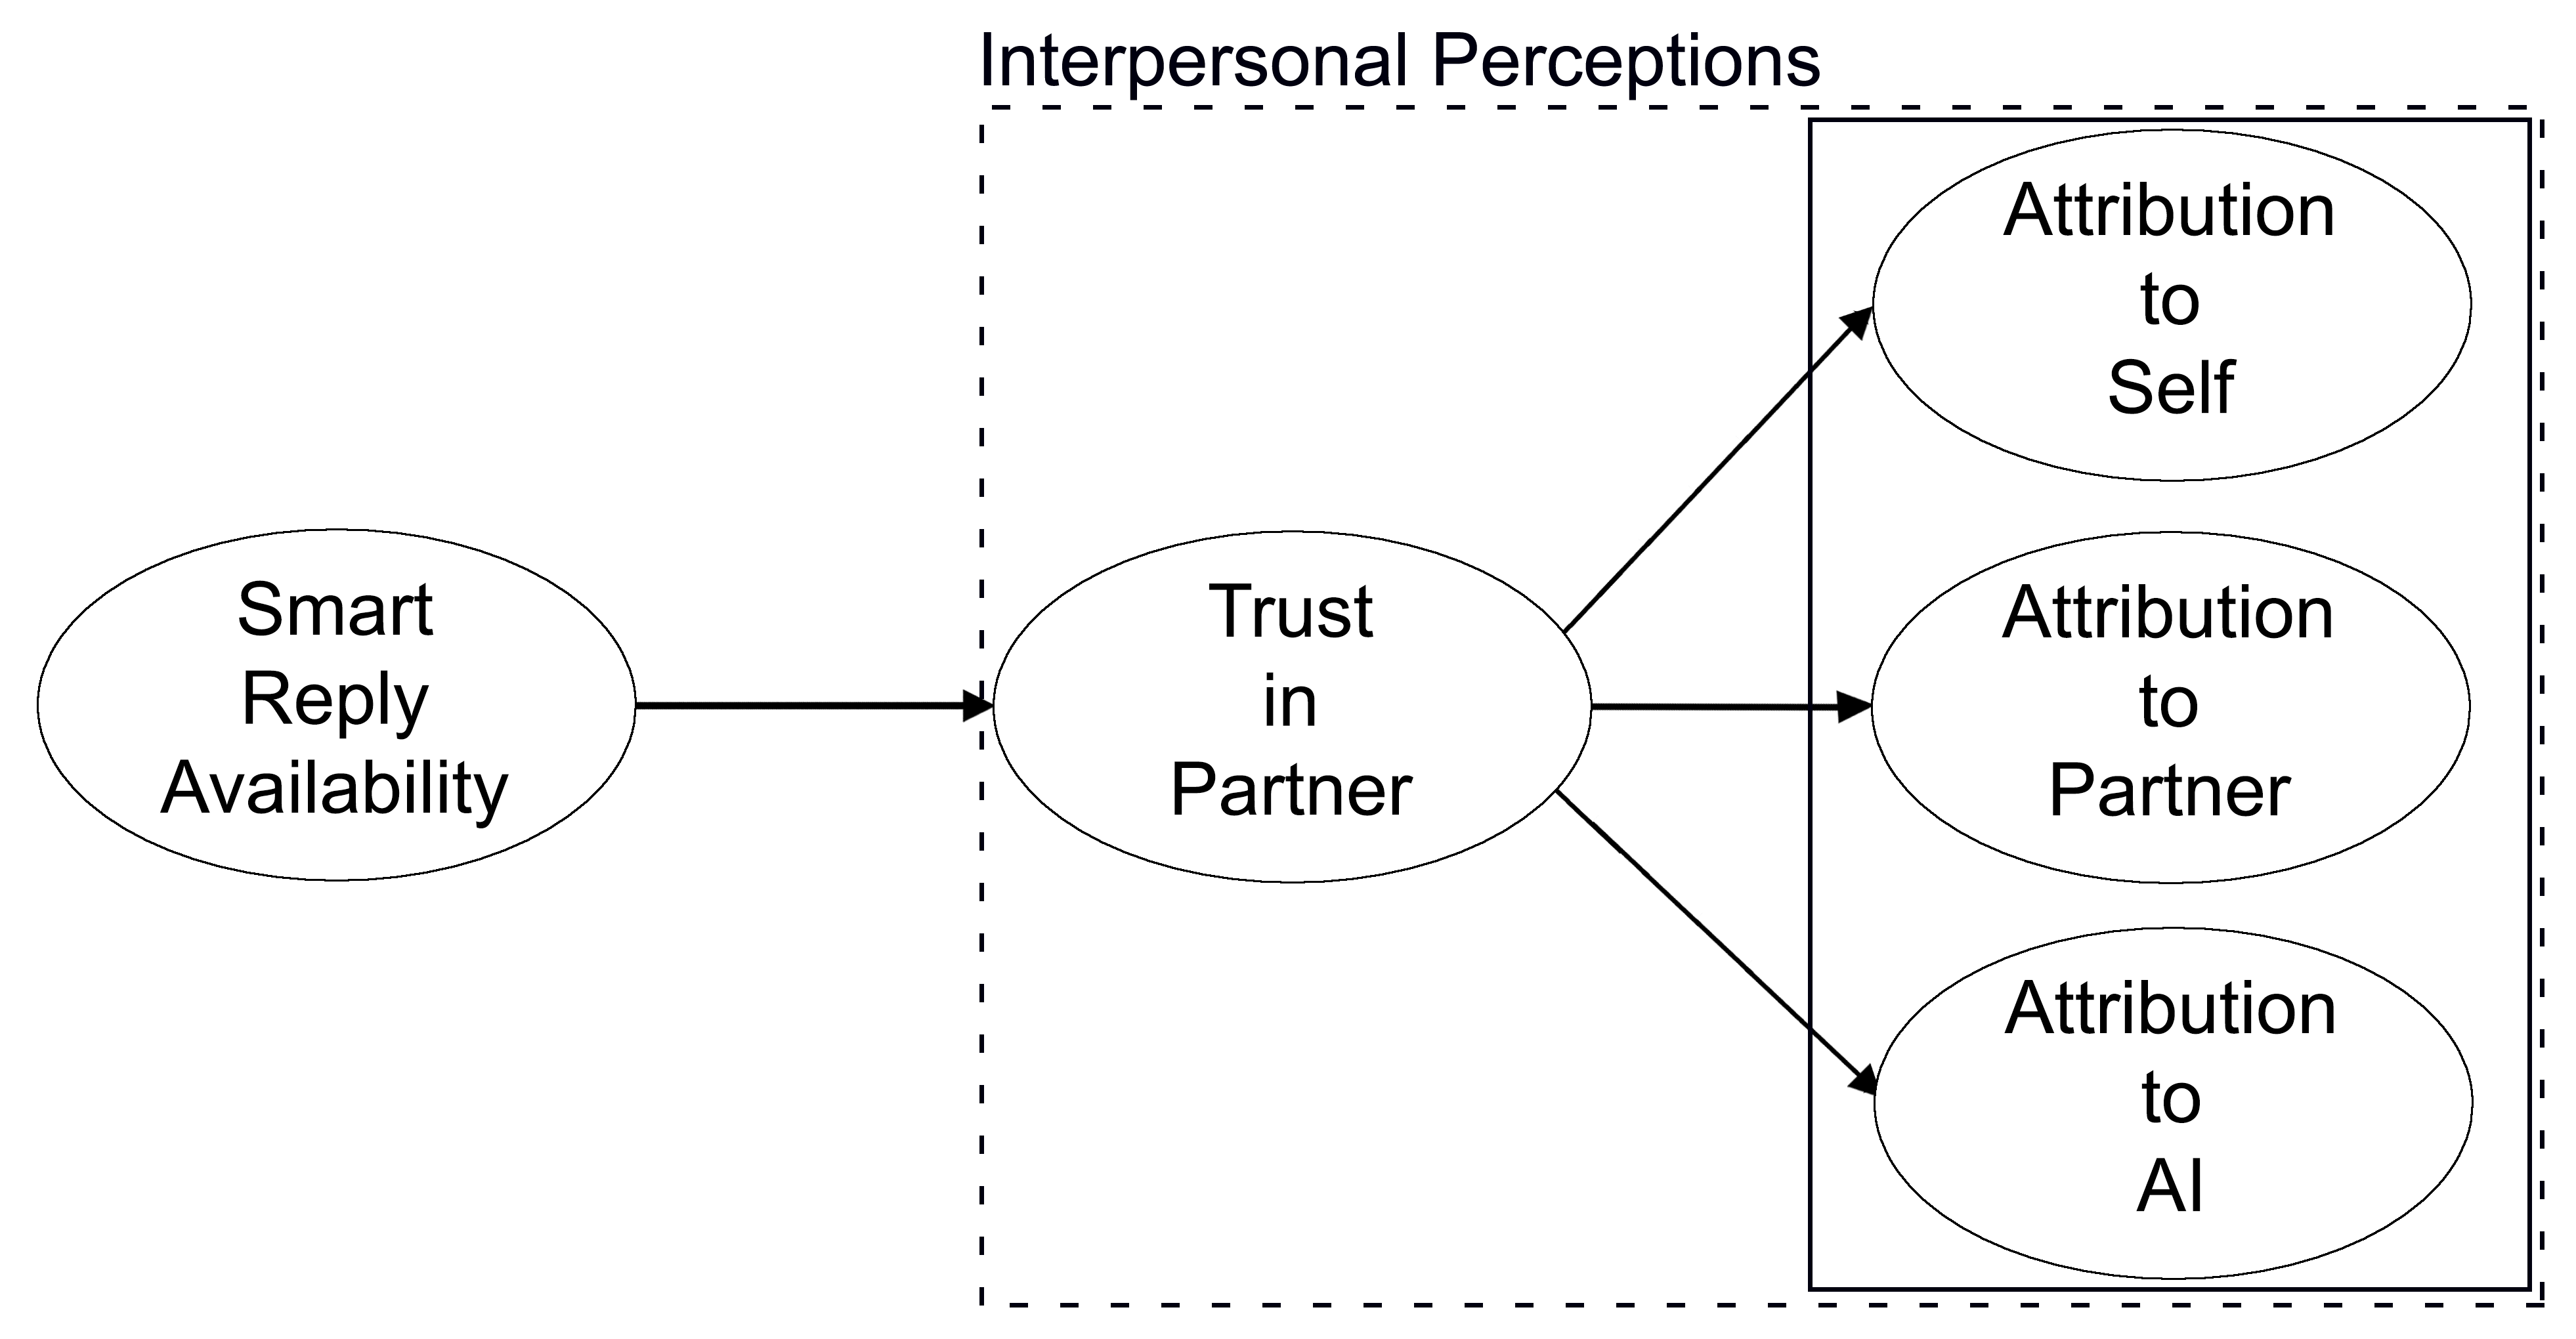 Research model with trust and attribution as outcome variables
and the presence of smart replies as the independent variable